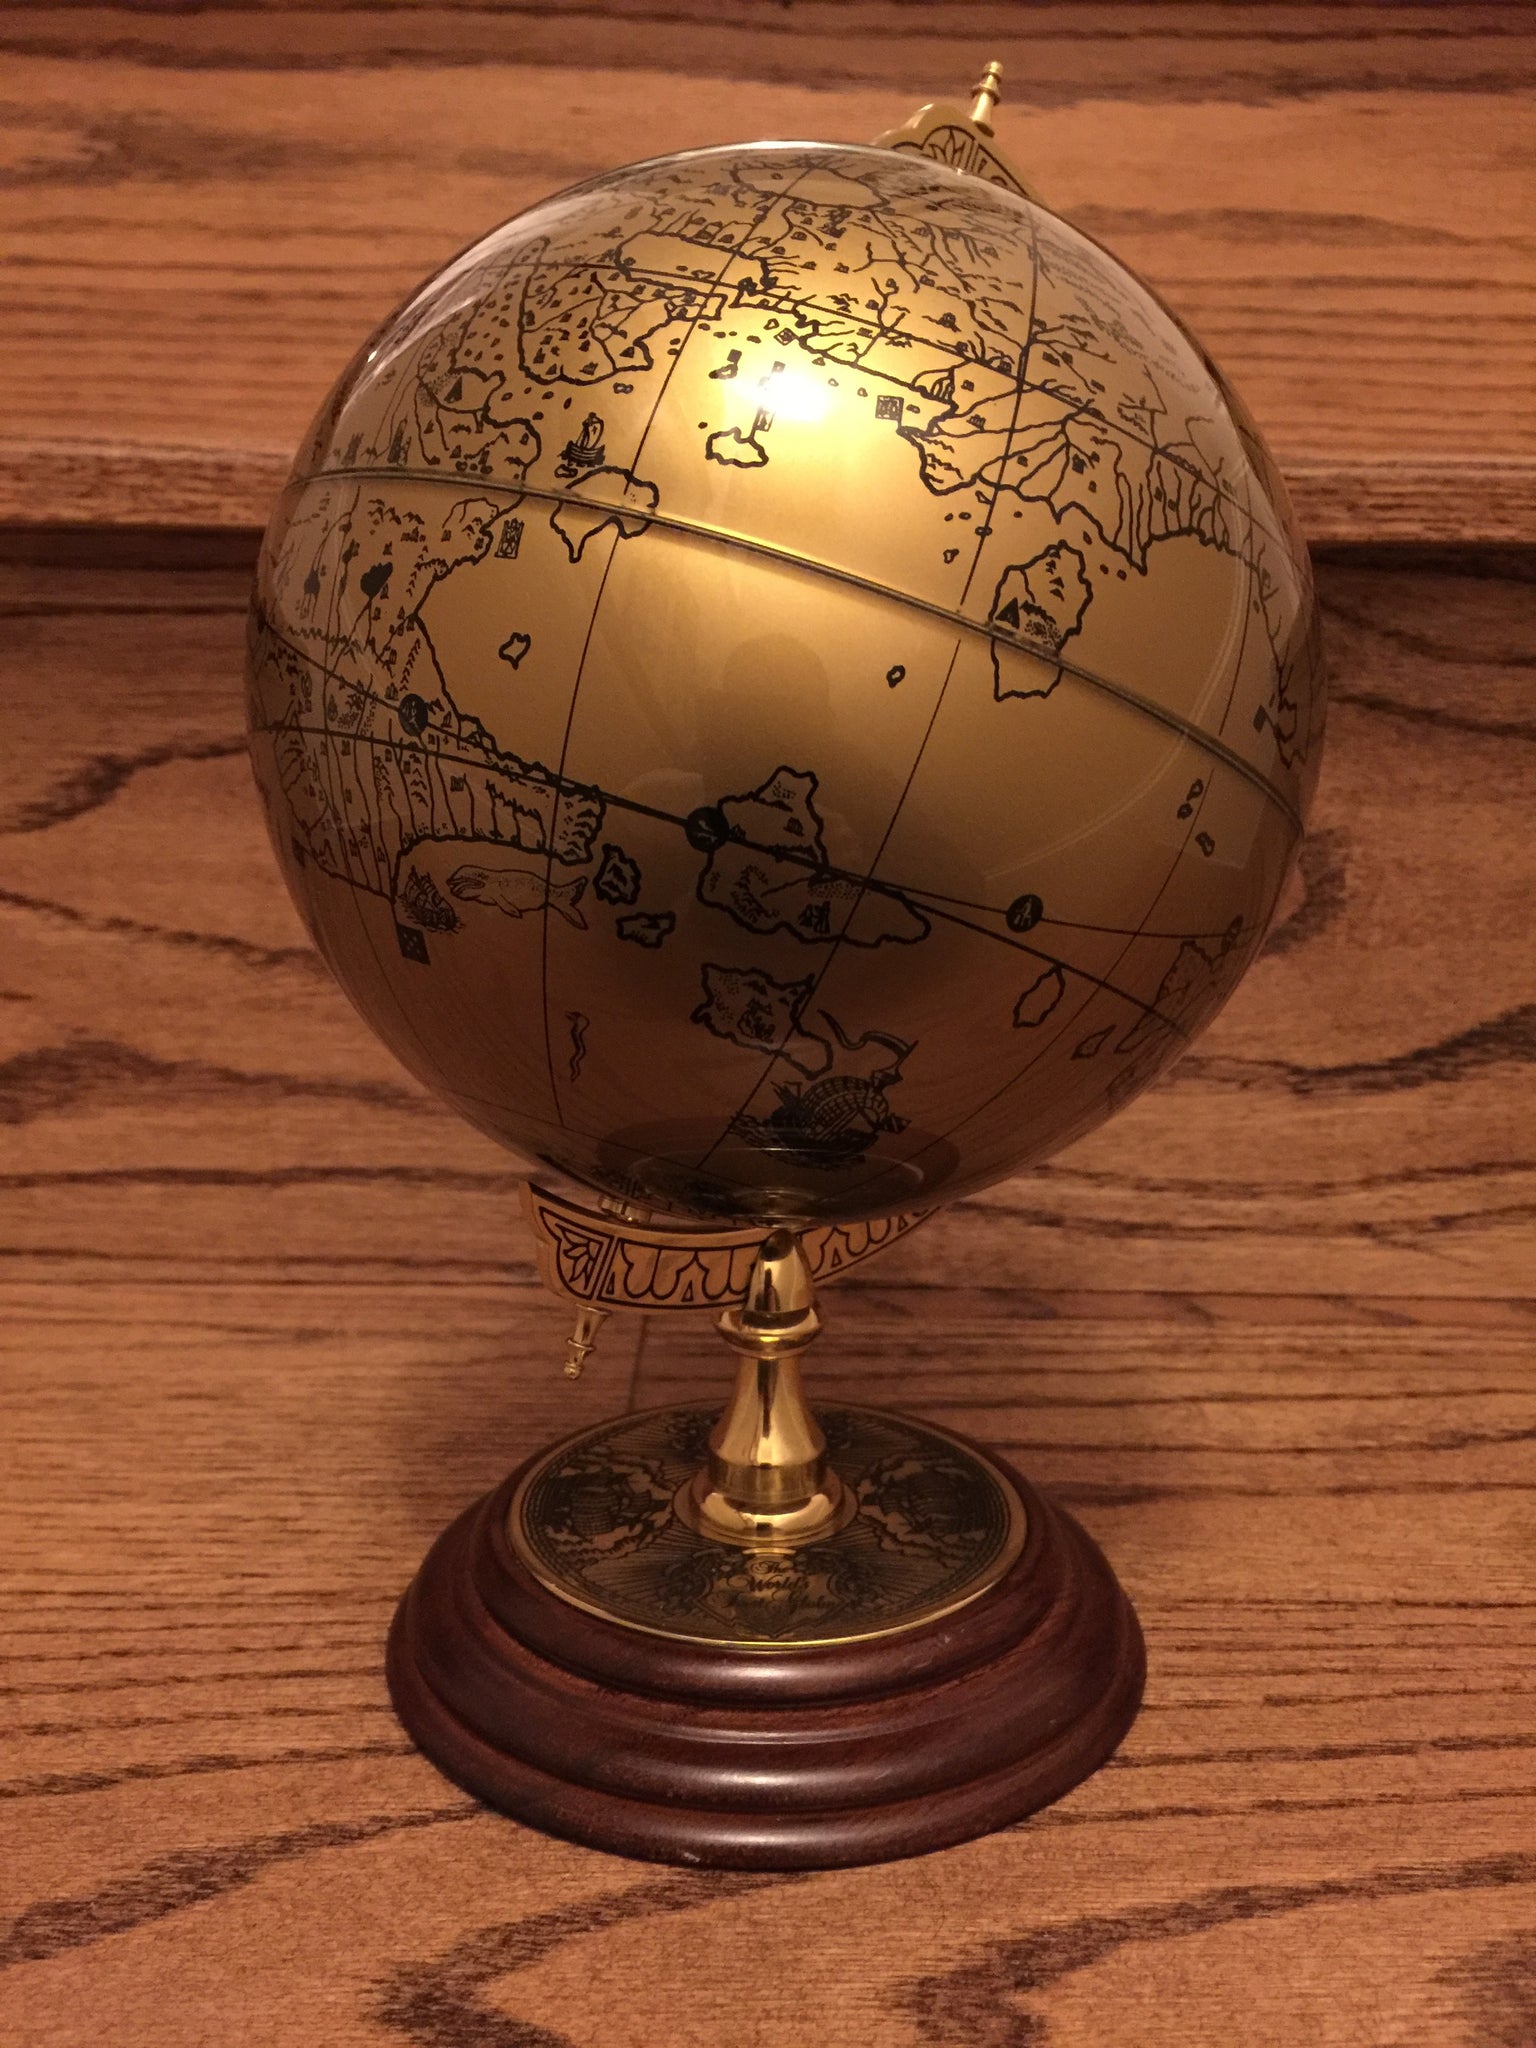 Royal Geographical Society Discovery Globe, Desktop Model of the